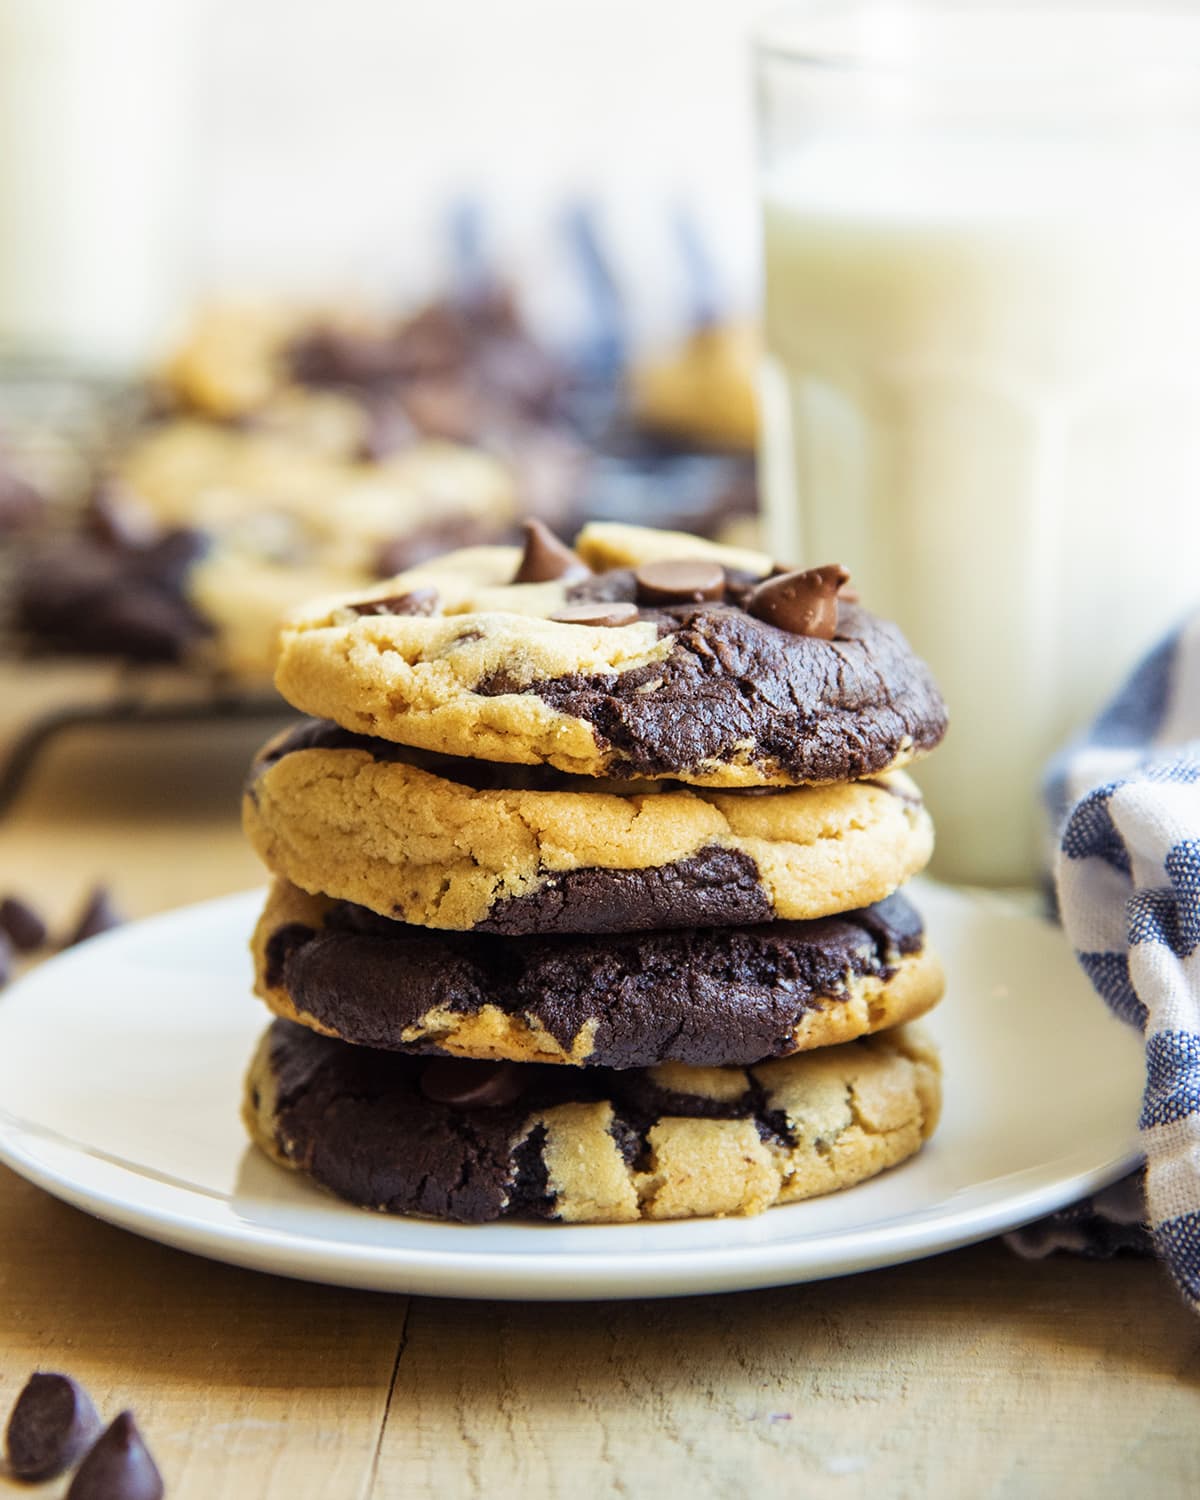 A stack of 4 cookies with peanut butter and chocolate cookie swirled together with chocolate chips.